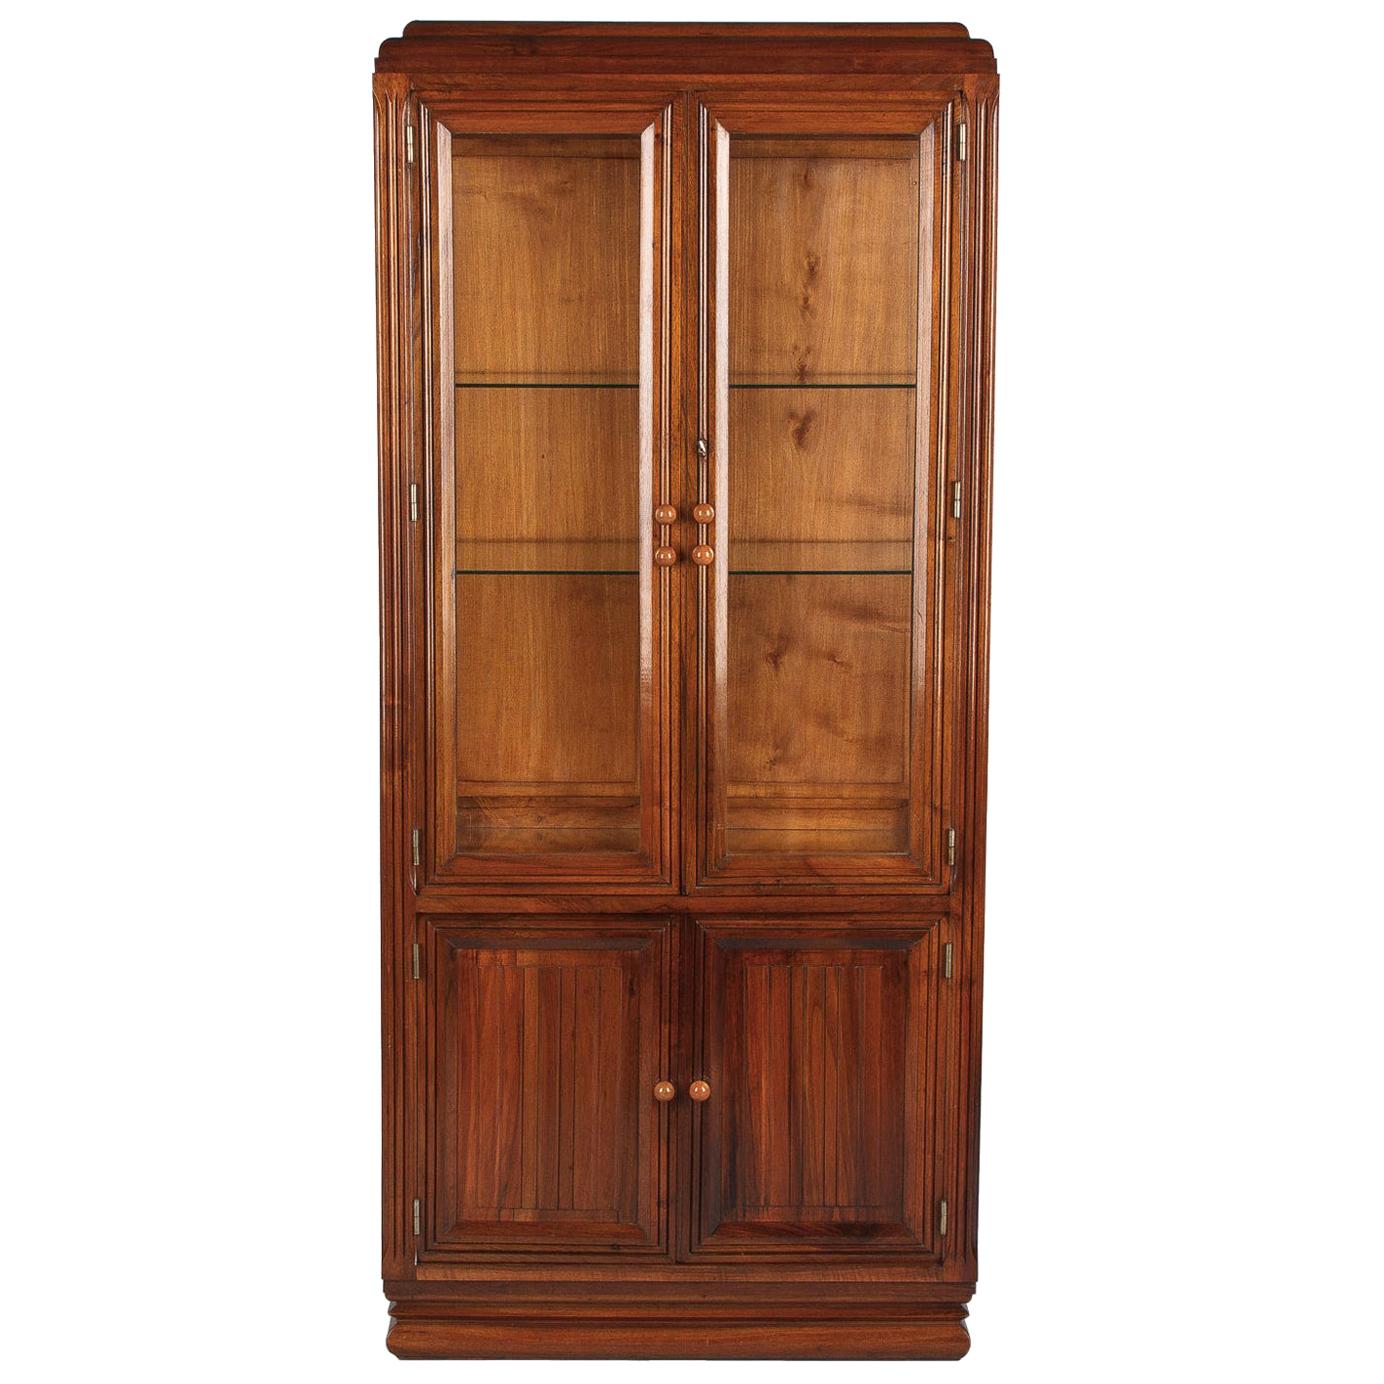 French Art Deco Walnut Display Cabinet or Bookcase, 1930s